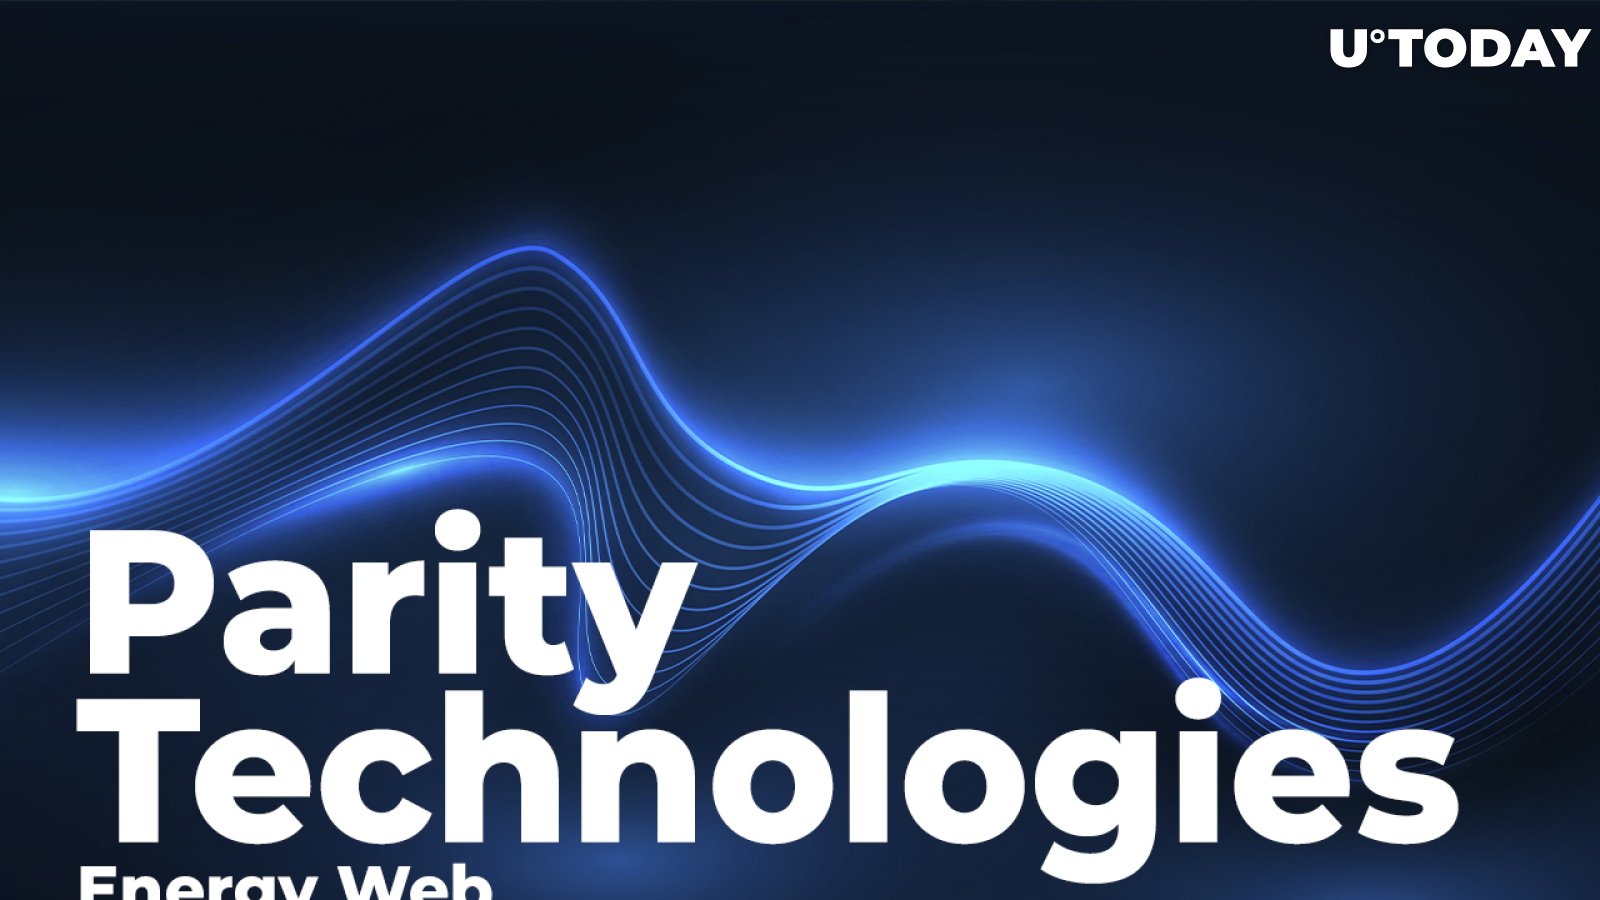 Parity Technologies Partners with Energy Web to Leverage Substrate in Energy Sector Management